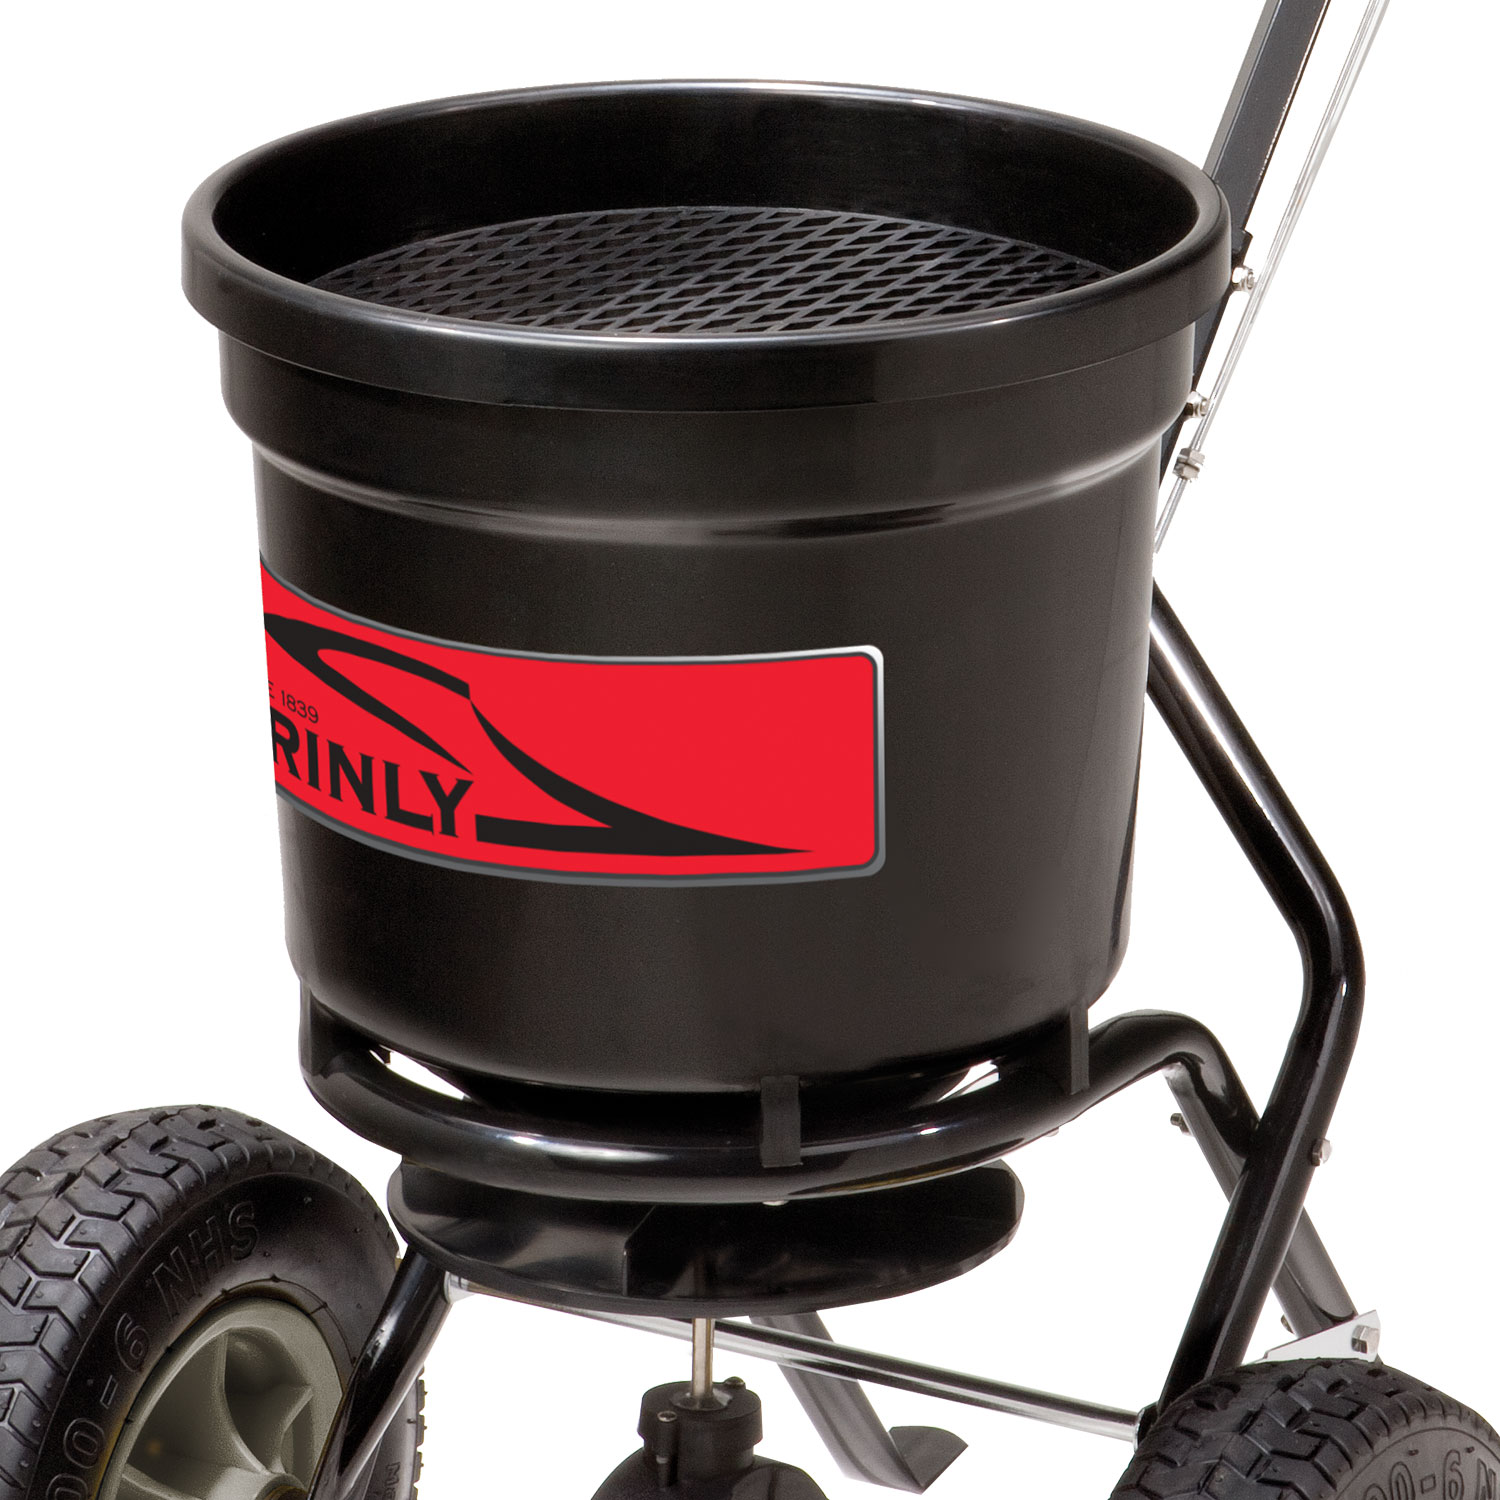 Brinly P20-500BHDF Push Spreader with Side Deflector Kit 50-Pound Capacity 